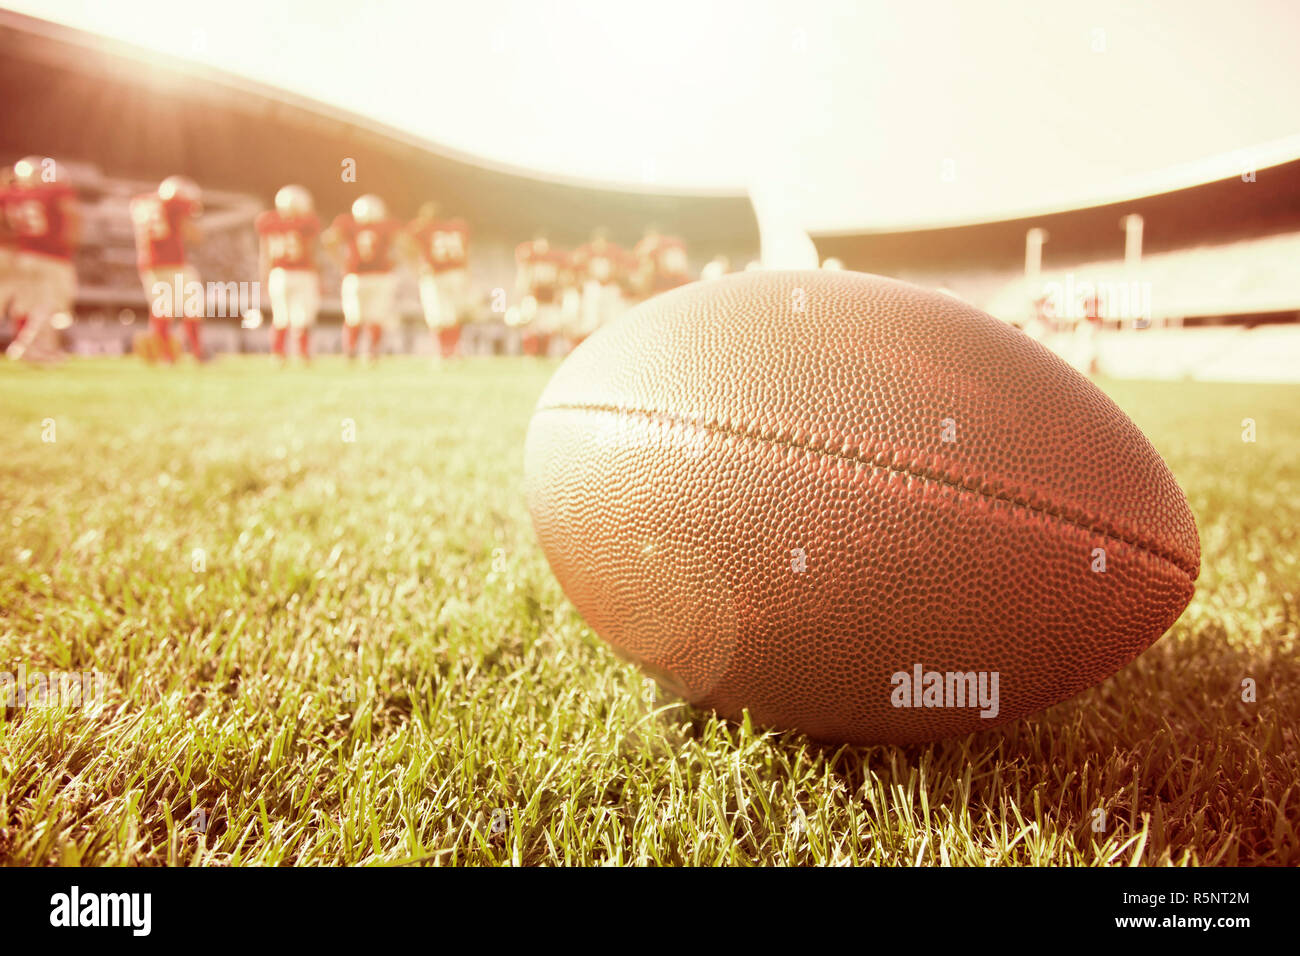 Close up of an american football Stock Photo